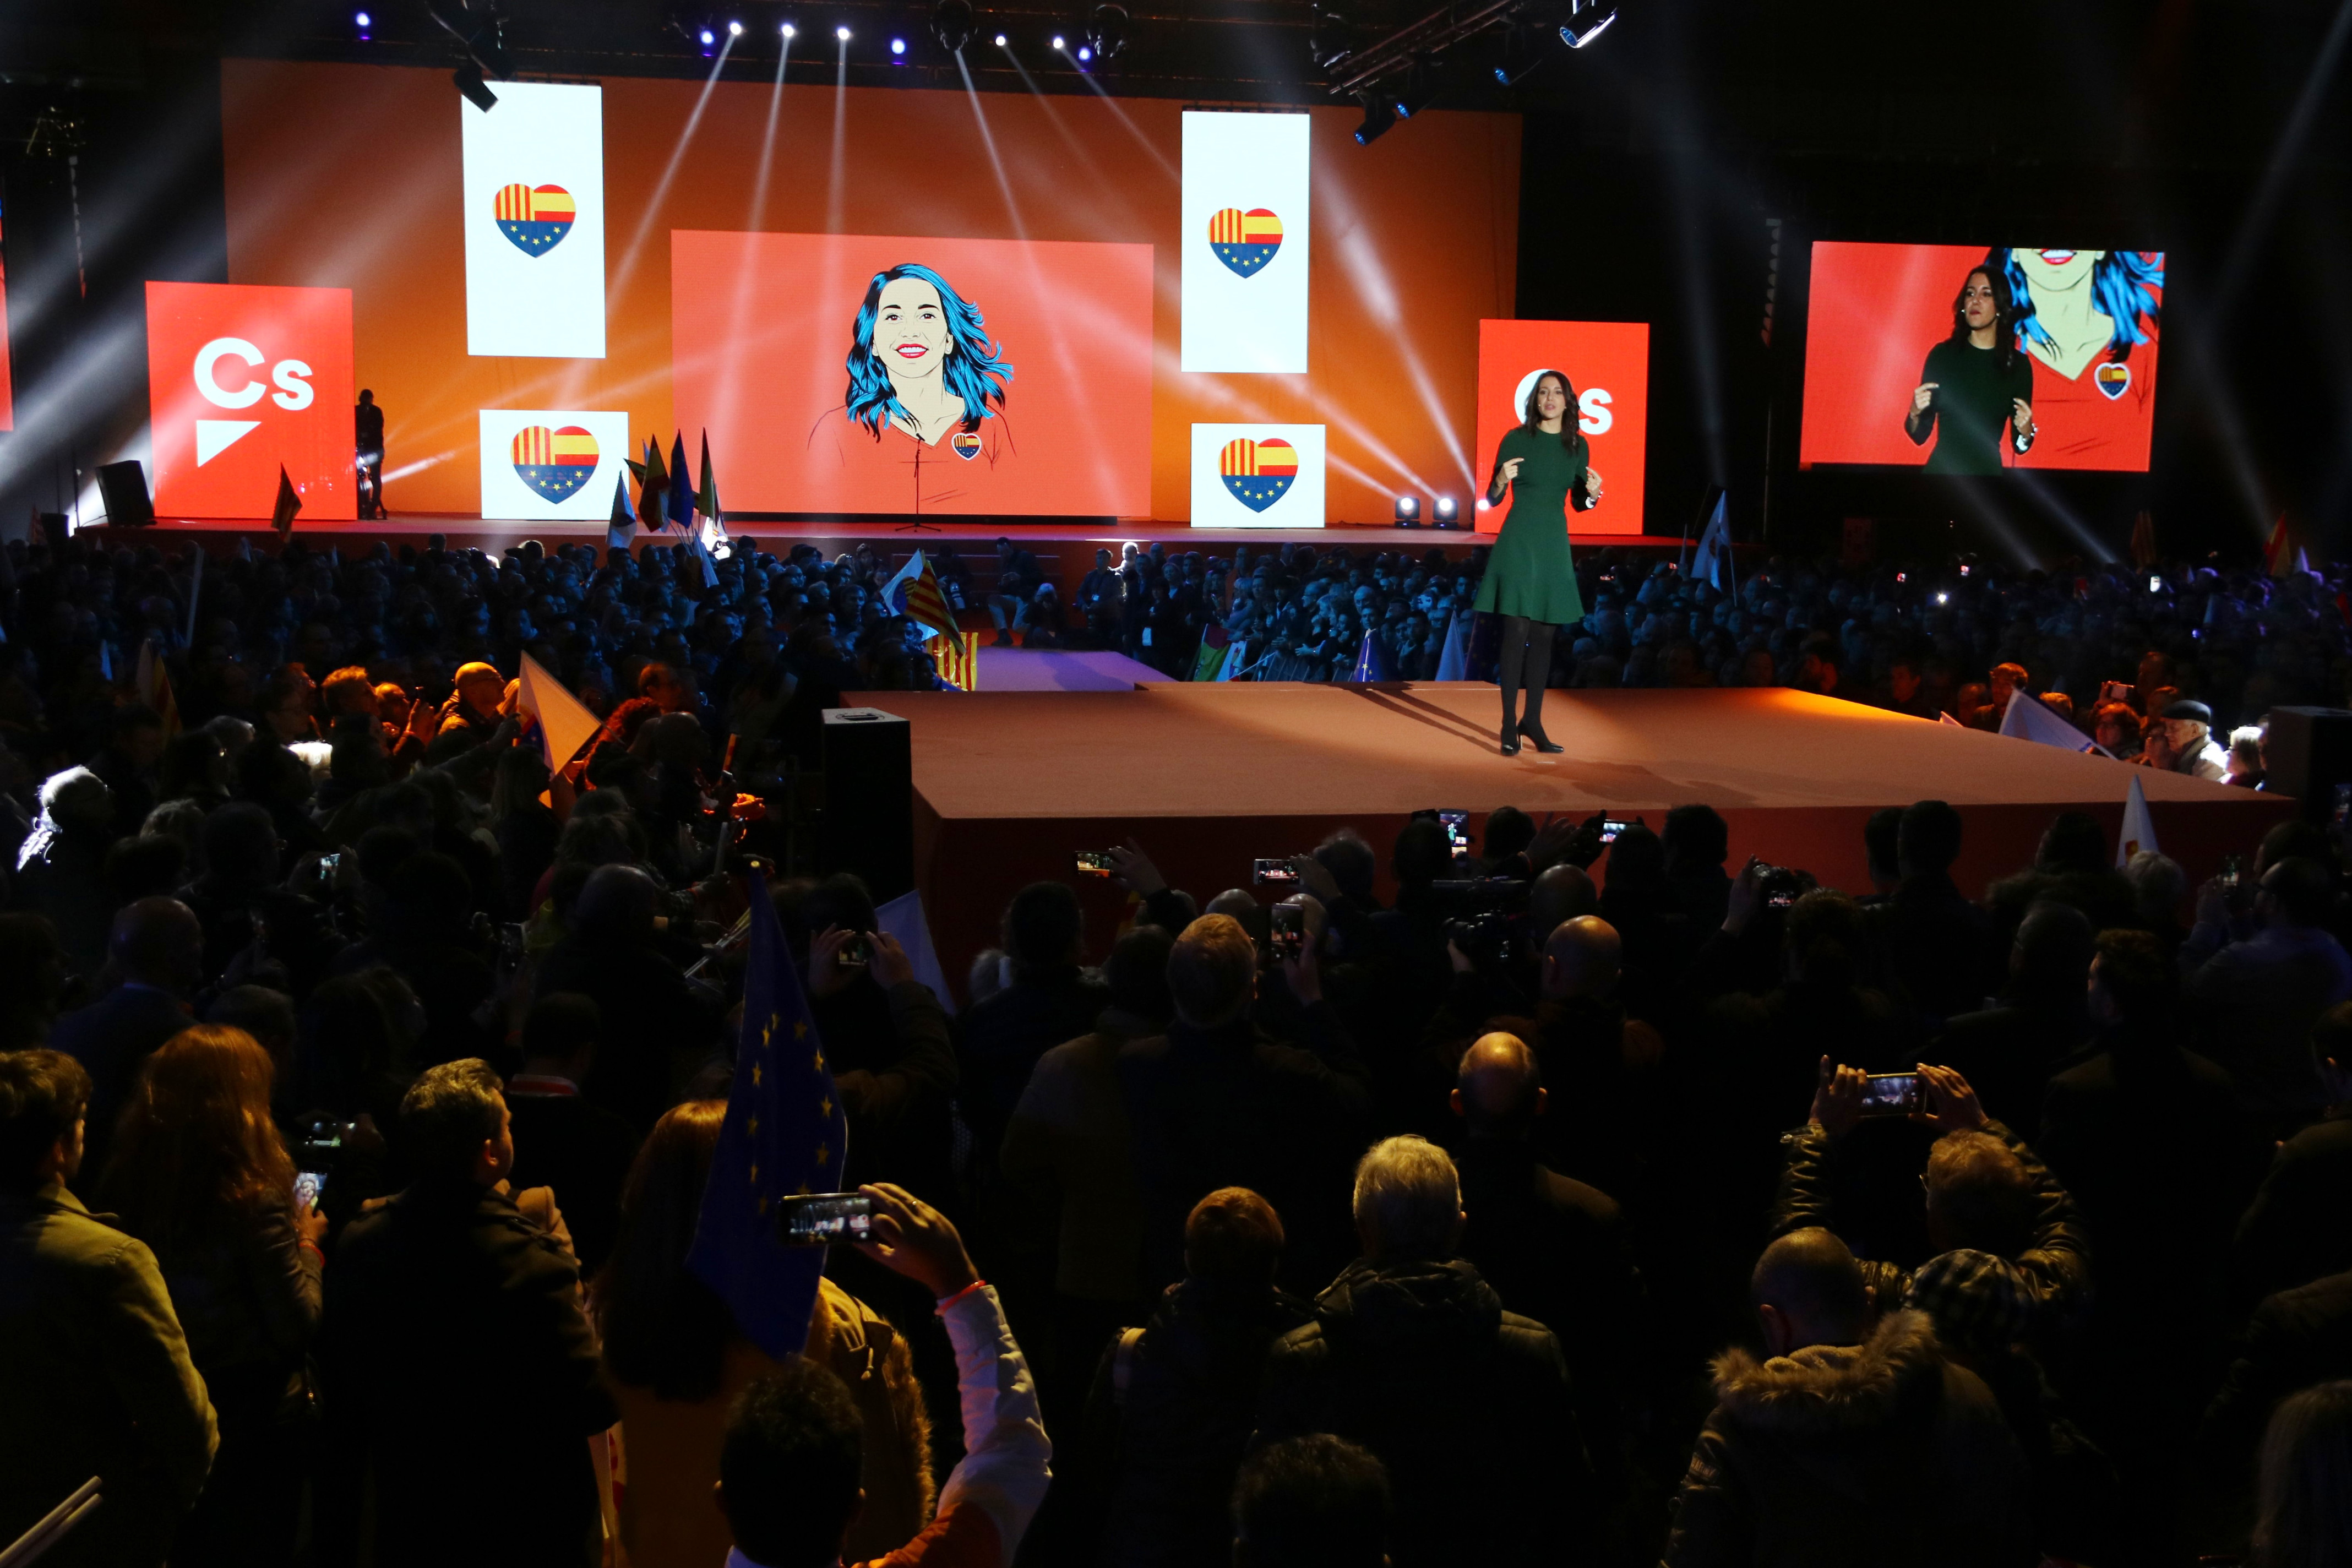 Inés Arrimadas, the candidate for Ciutadans in Catalonia, speaking at the party's main campaign event in Barcelona on December 17 2017 (by Sílvia Jardí)